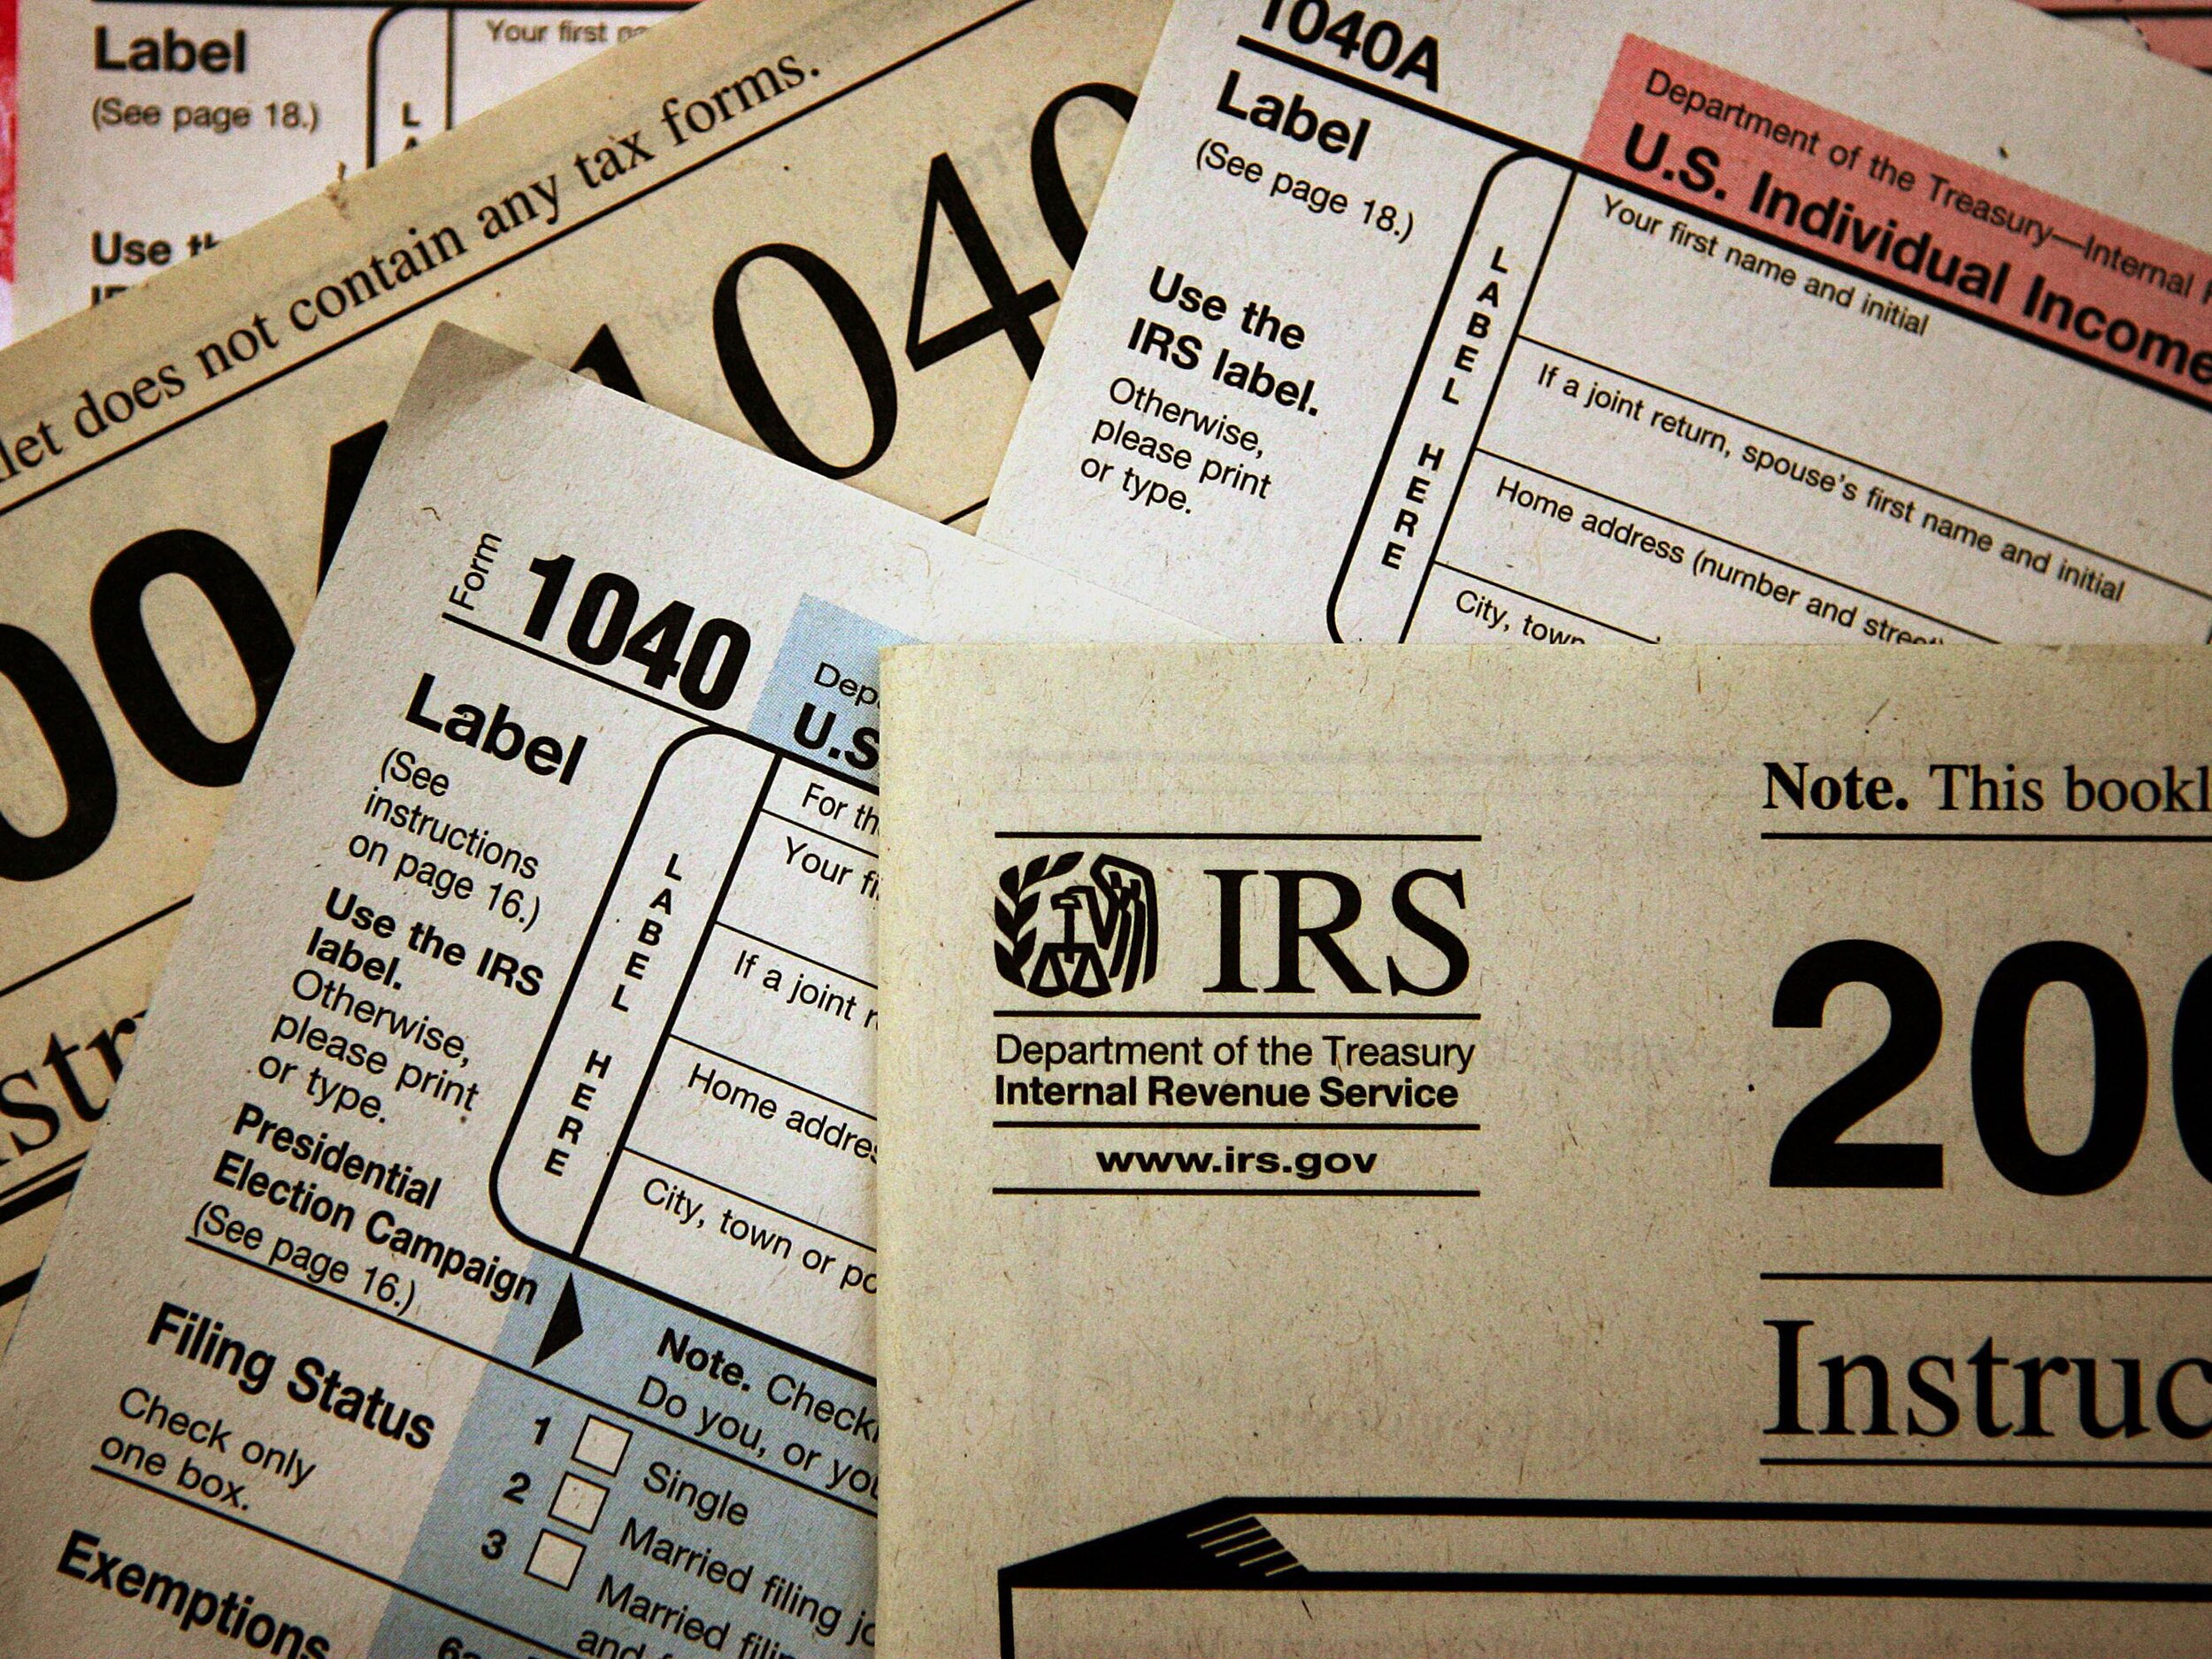 Pay IRS Tax Attorney helping you settle or lower your back taxes. Stop the IRS, protect your bank & wages today